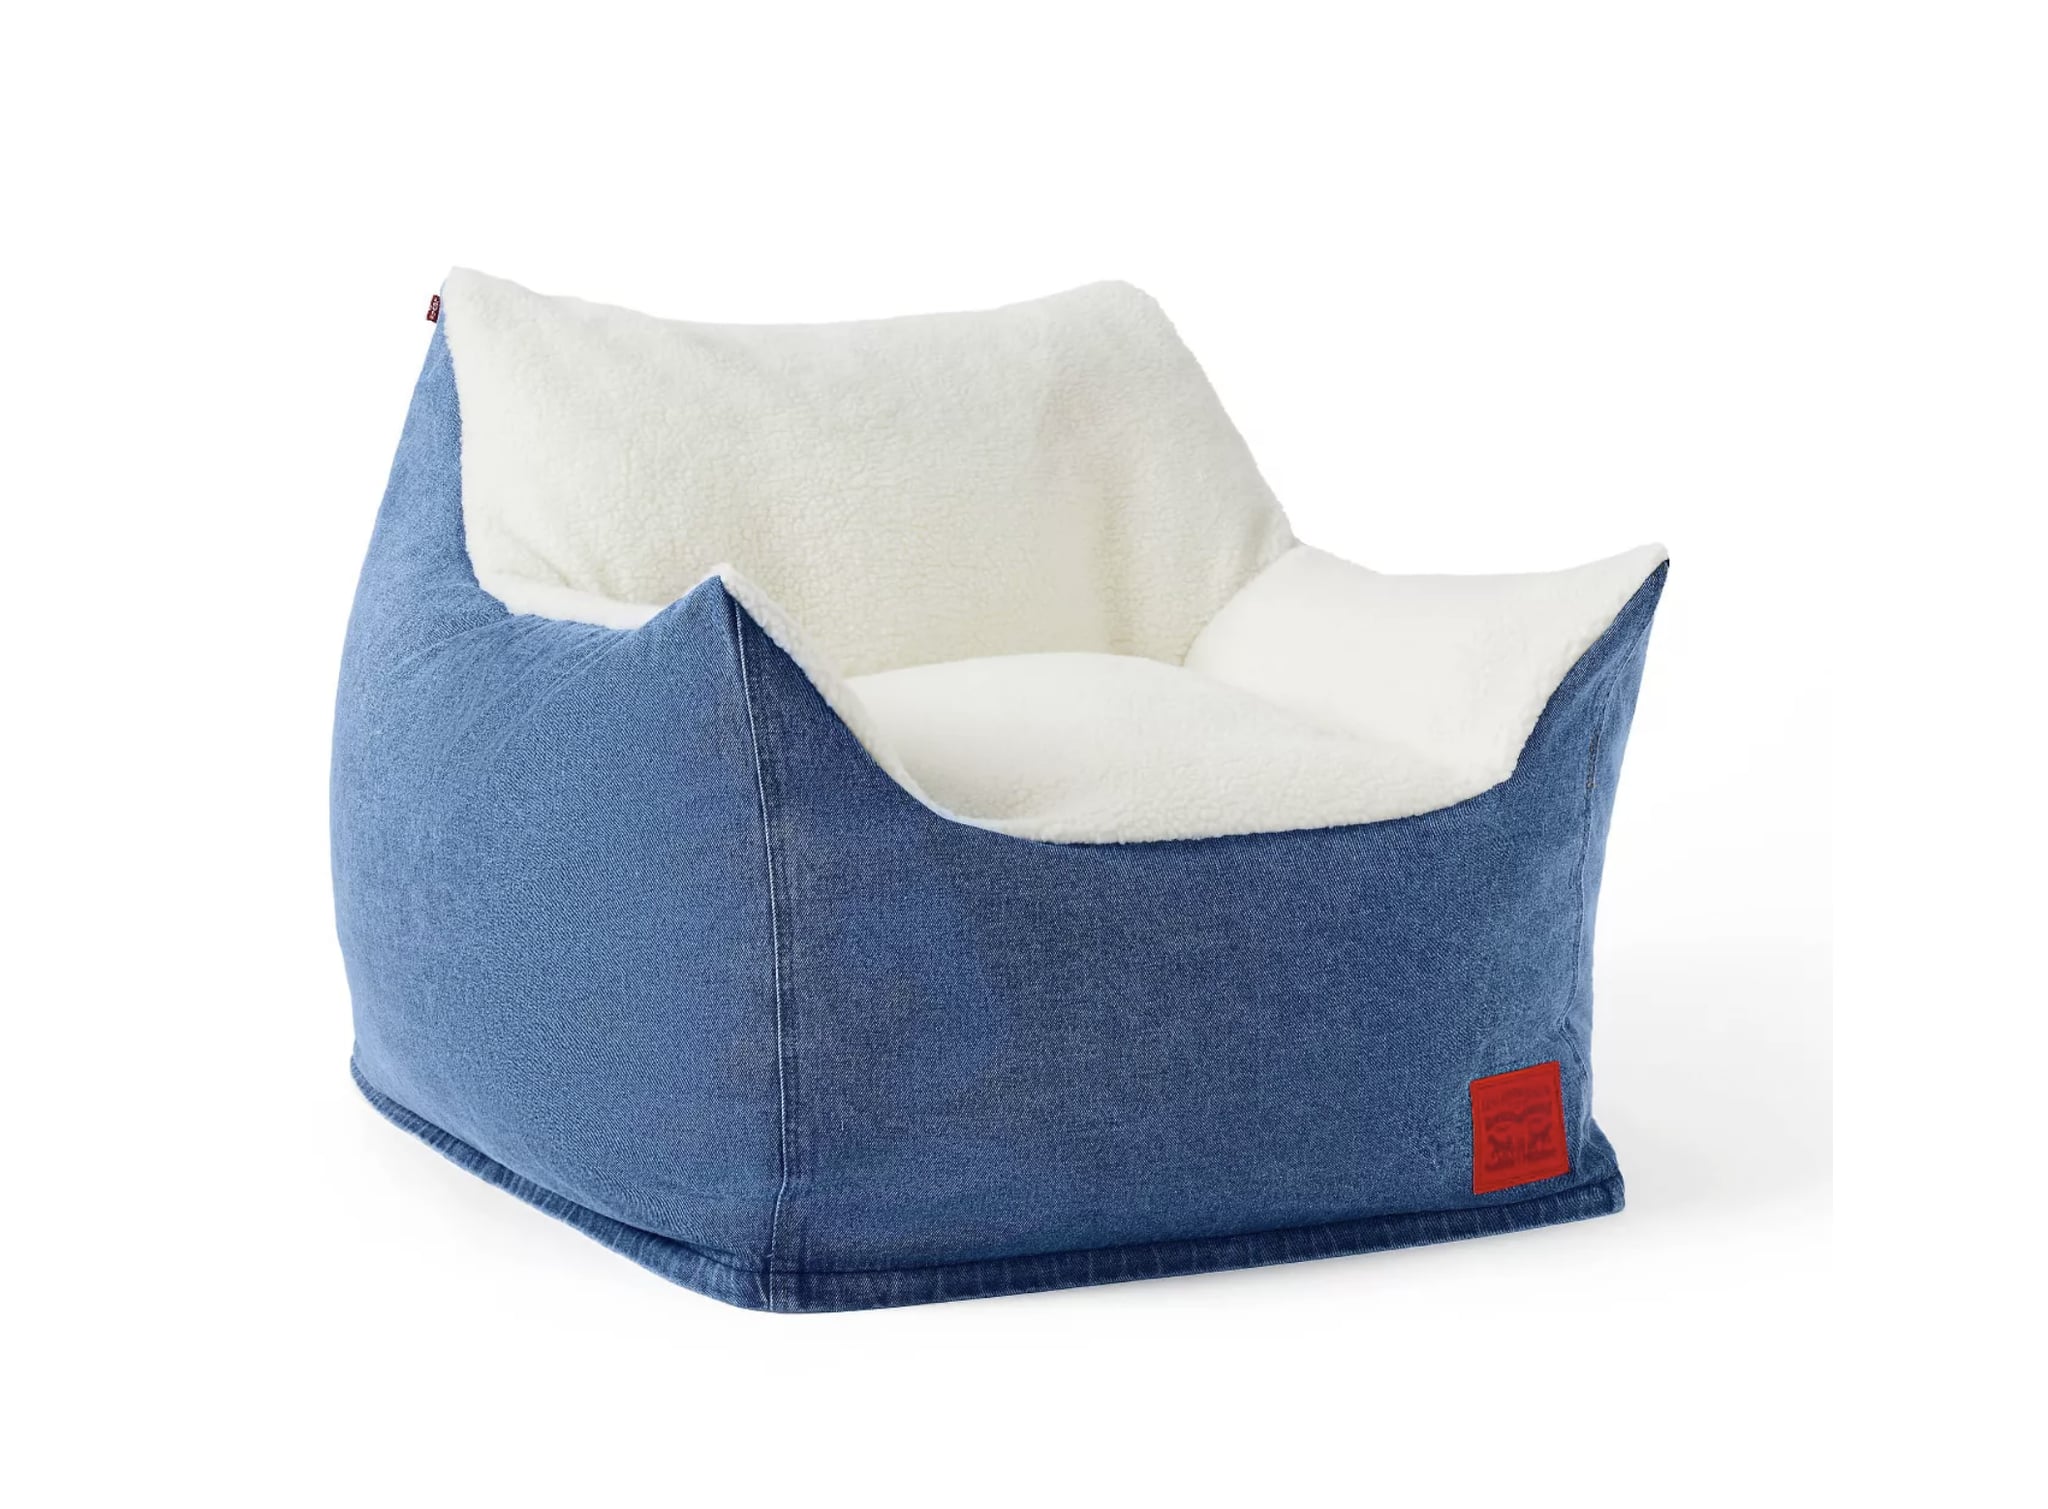 Denim & Sherpa Bean Bag Chair | Levi's and Target Teamed Up For a Home  Collection, and Just Wait Until You See the Denim Pouf | POPSUGAR Home  Photo 10